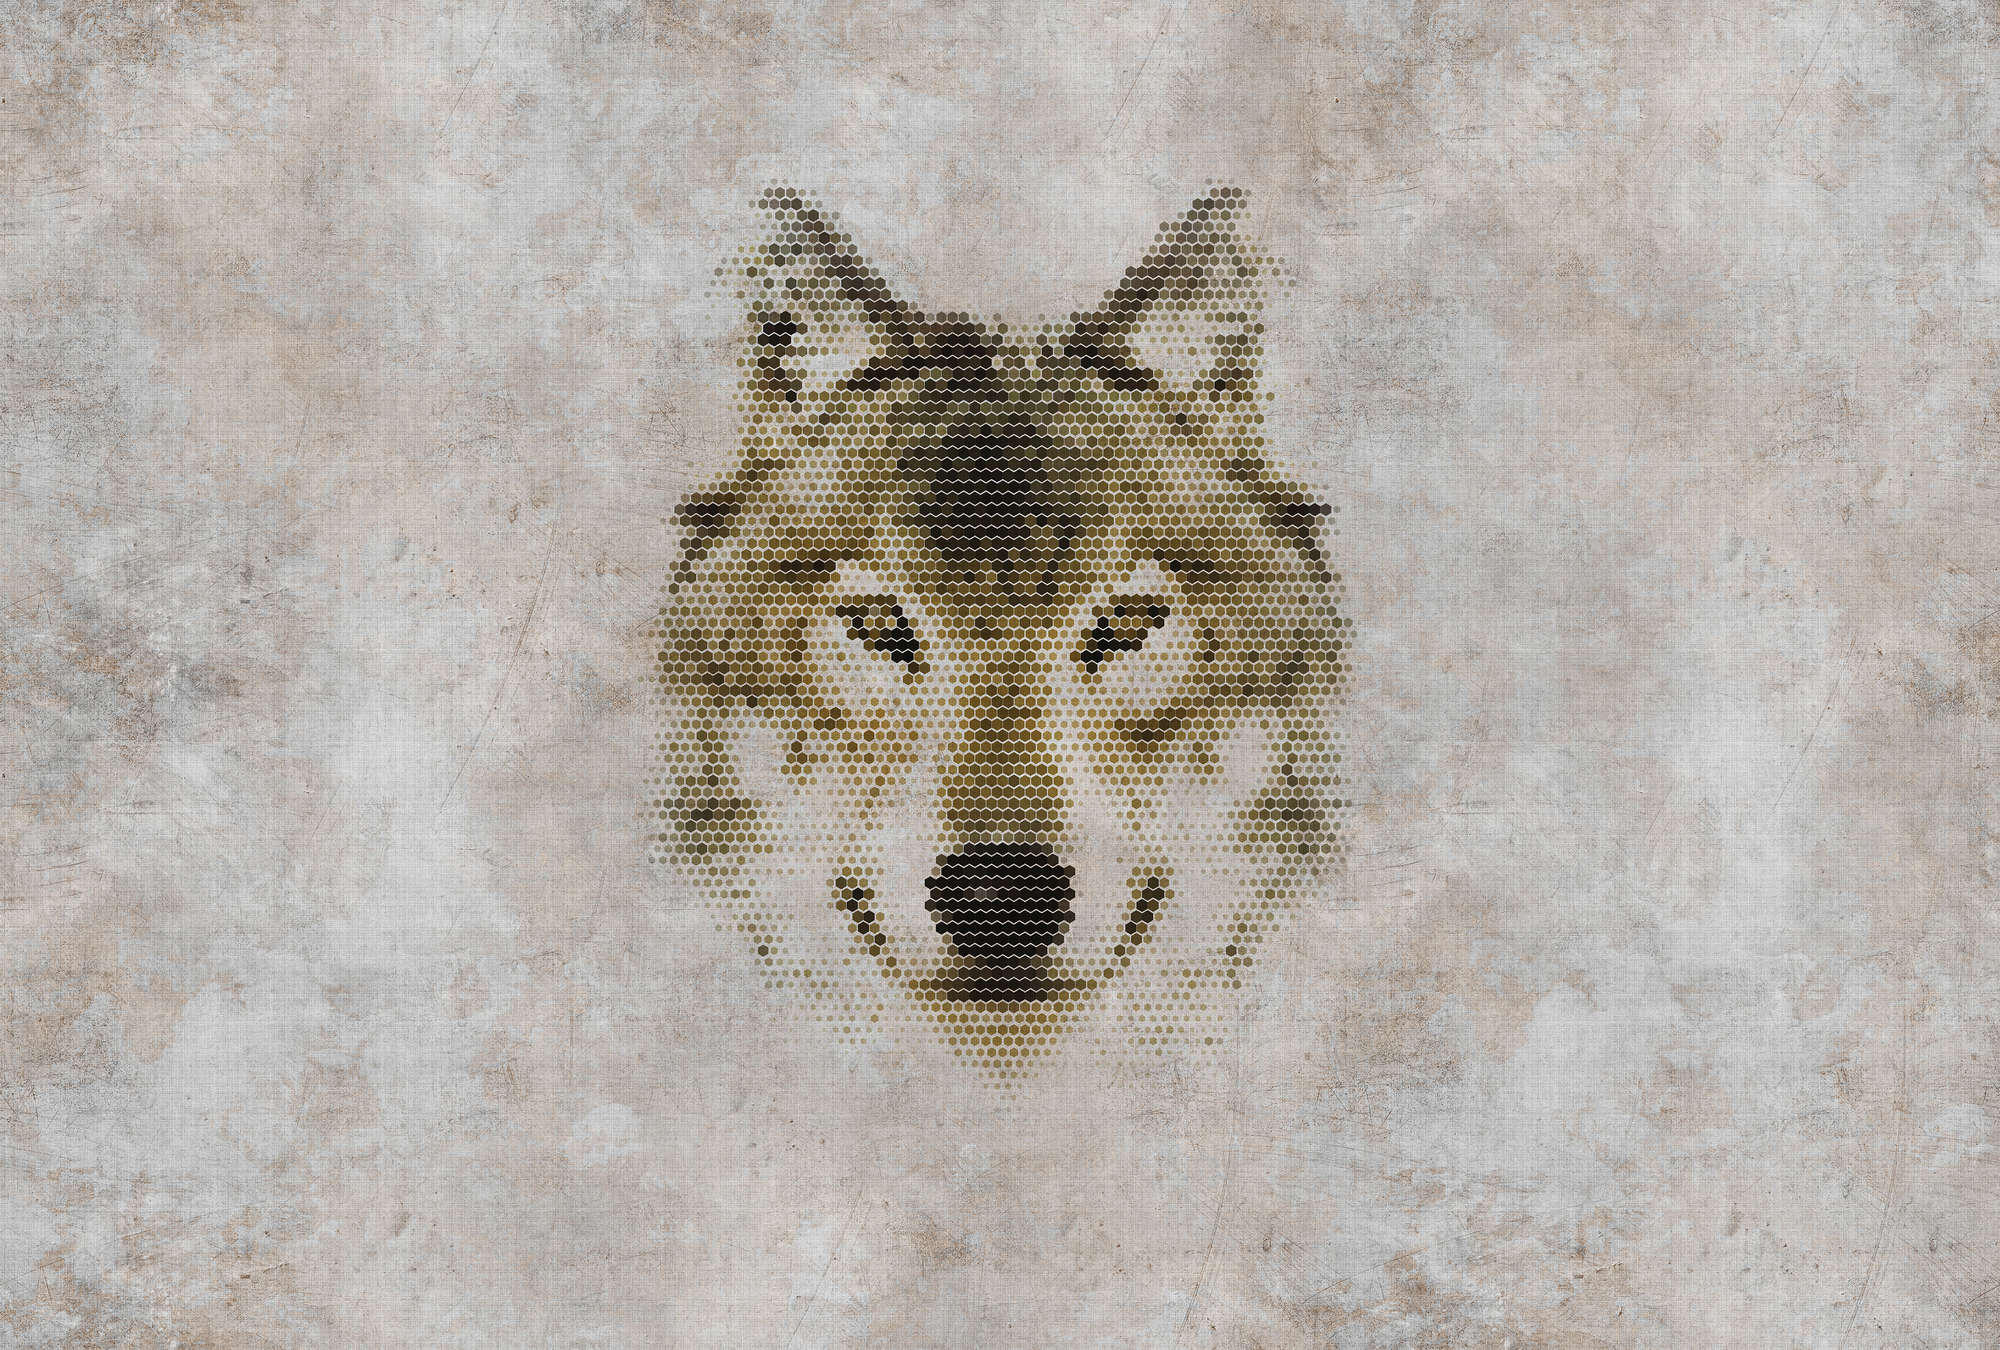             Big three 1 - digital print wallpaper in concrete look with wolf - natural linen structure - beige, brown | pearl smooth non-woven
        